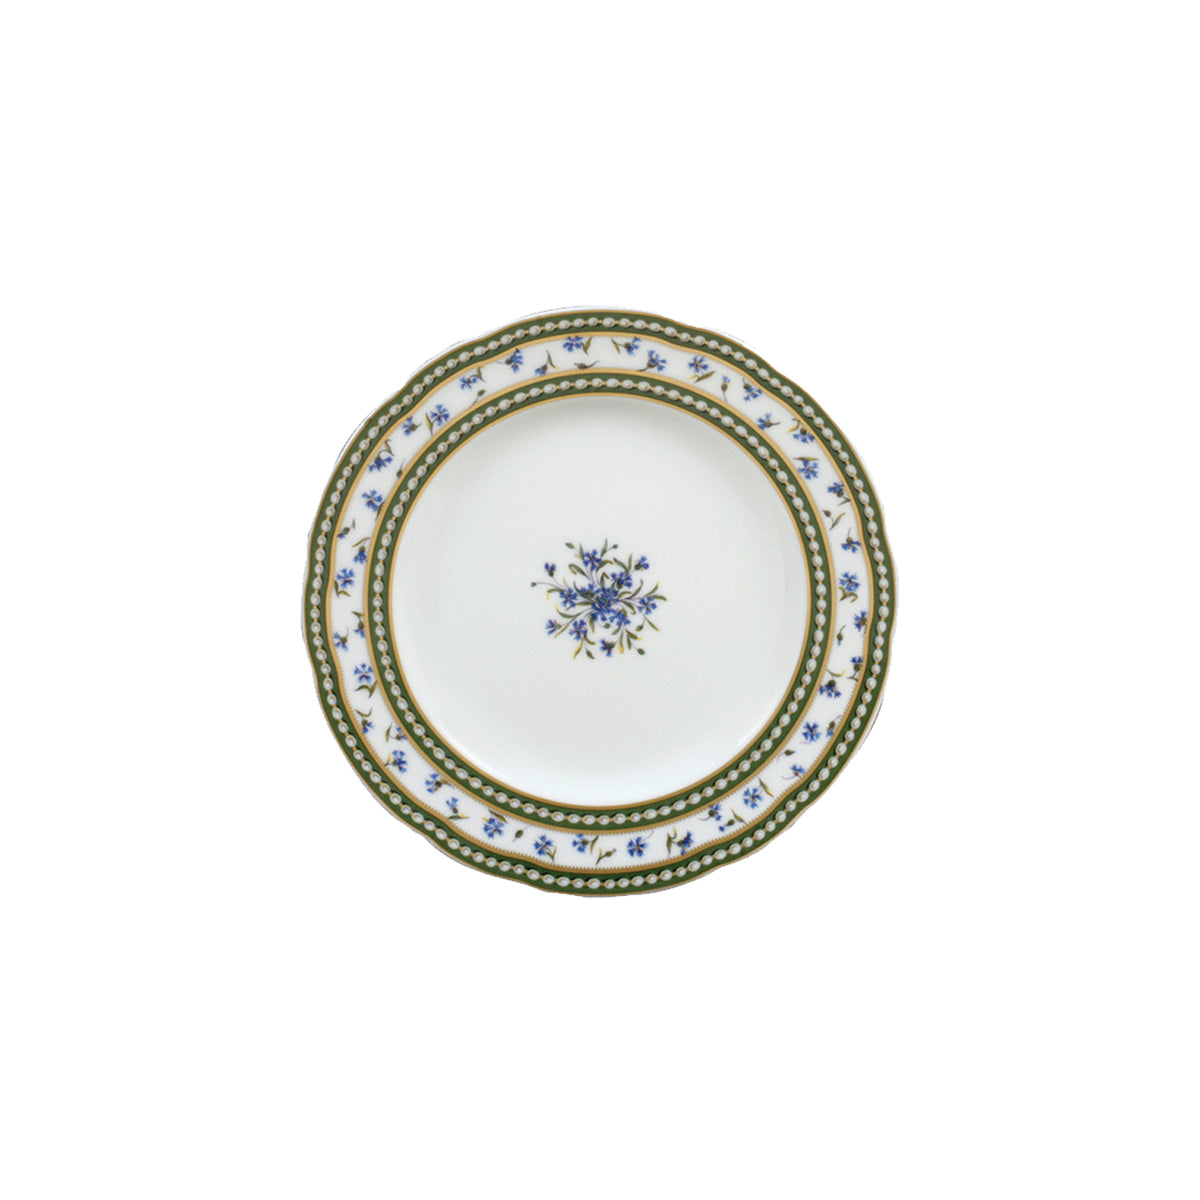 Marie Antoinette Bread and Butter Plate